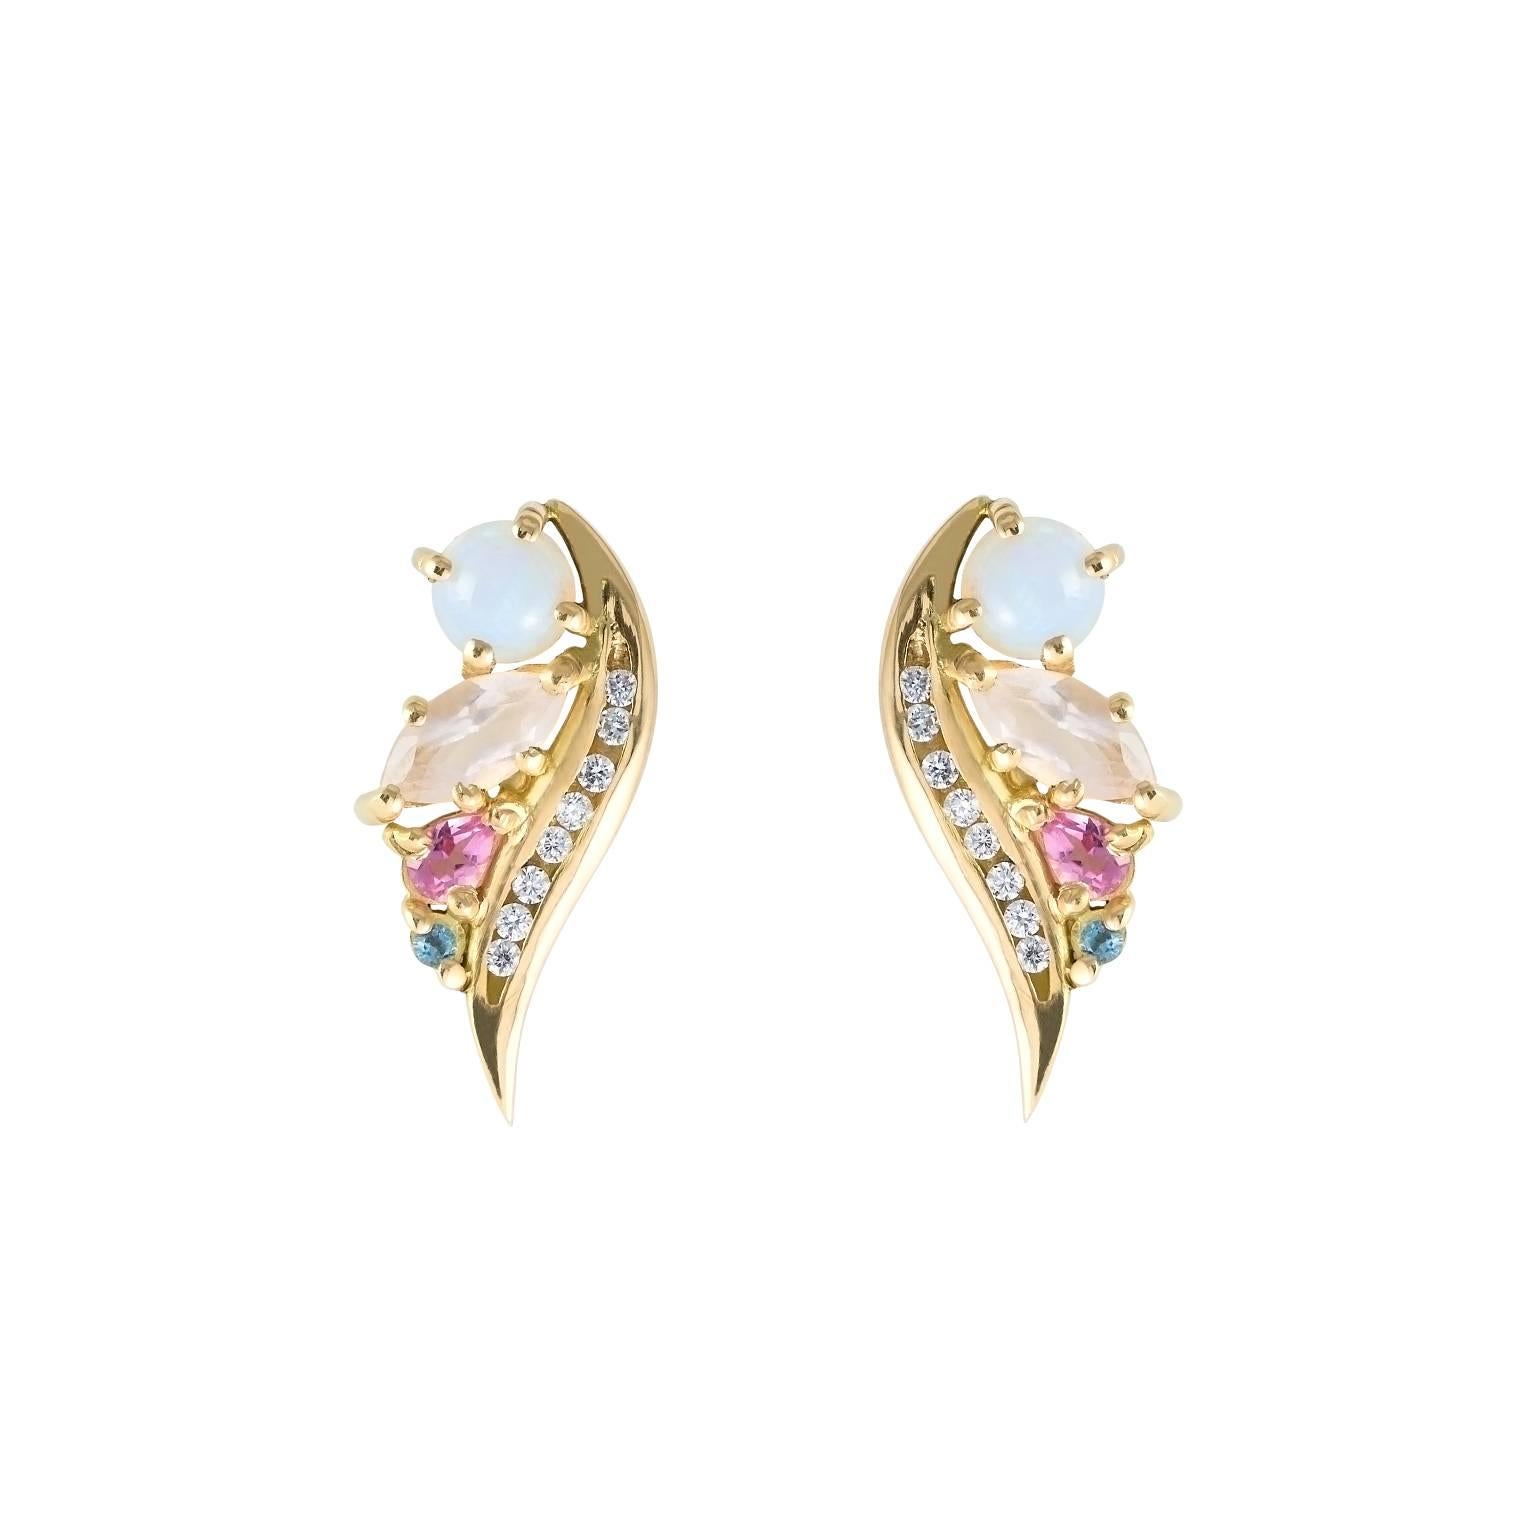 The Phoenix feather wing earrings are luminous and delightfully feminine in an Art Nouveau romantic style and pastel colour palette. Juxtaposing varied cut coloured gemstones perfectly suited in tone with a sleek feather design and sparkling